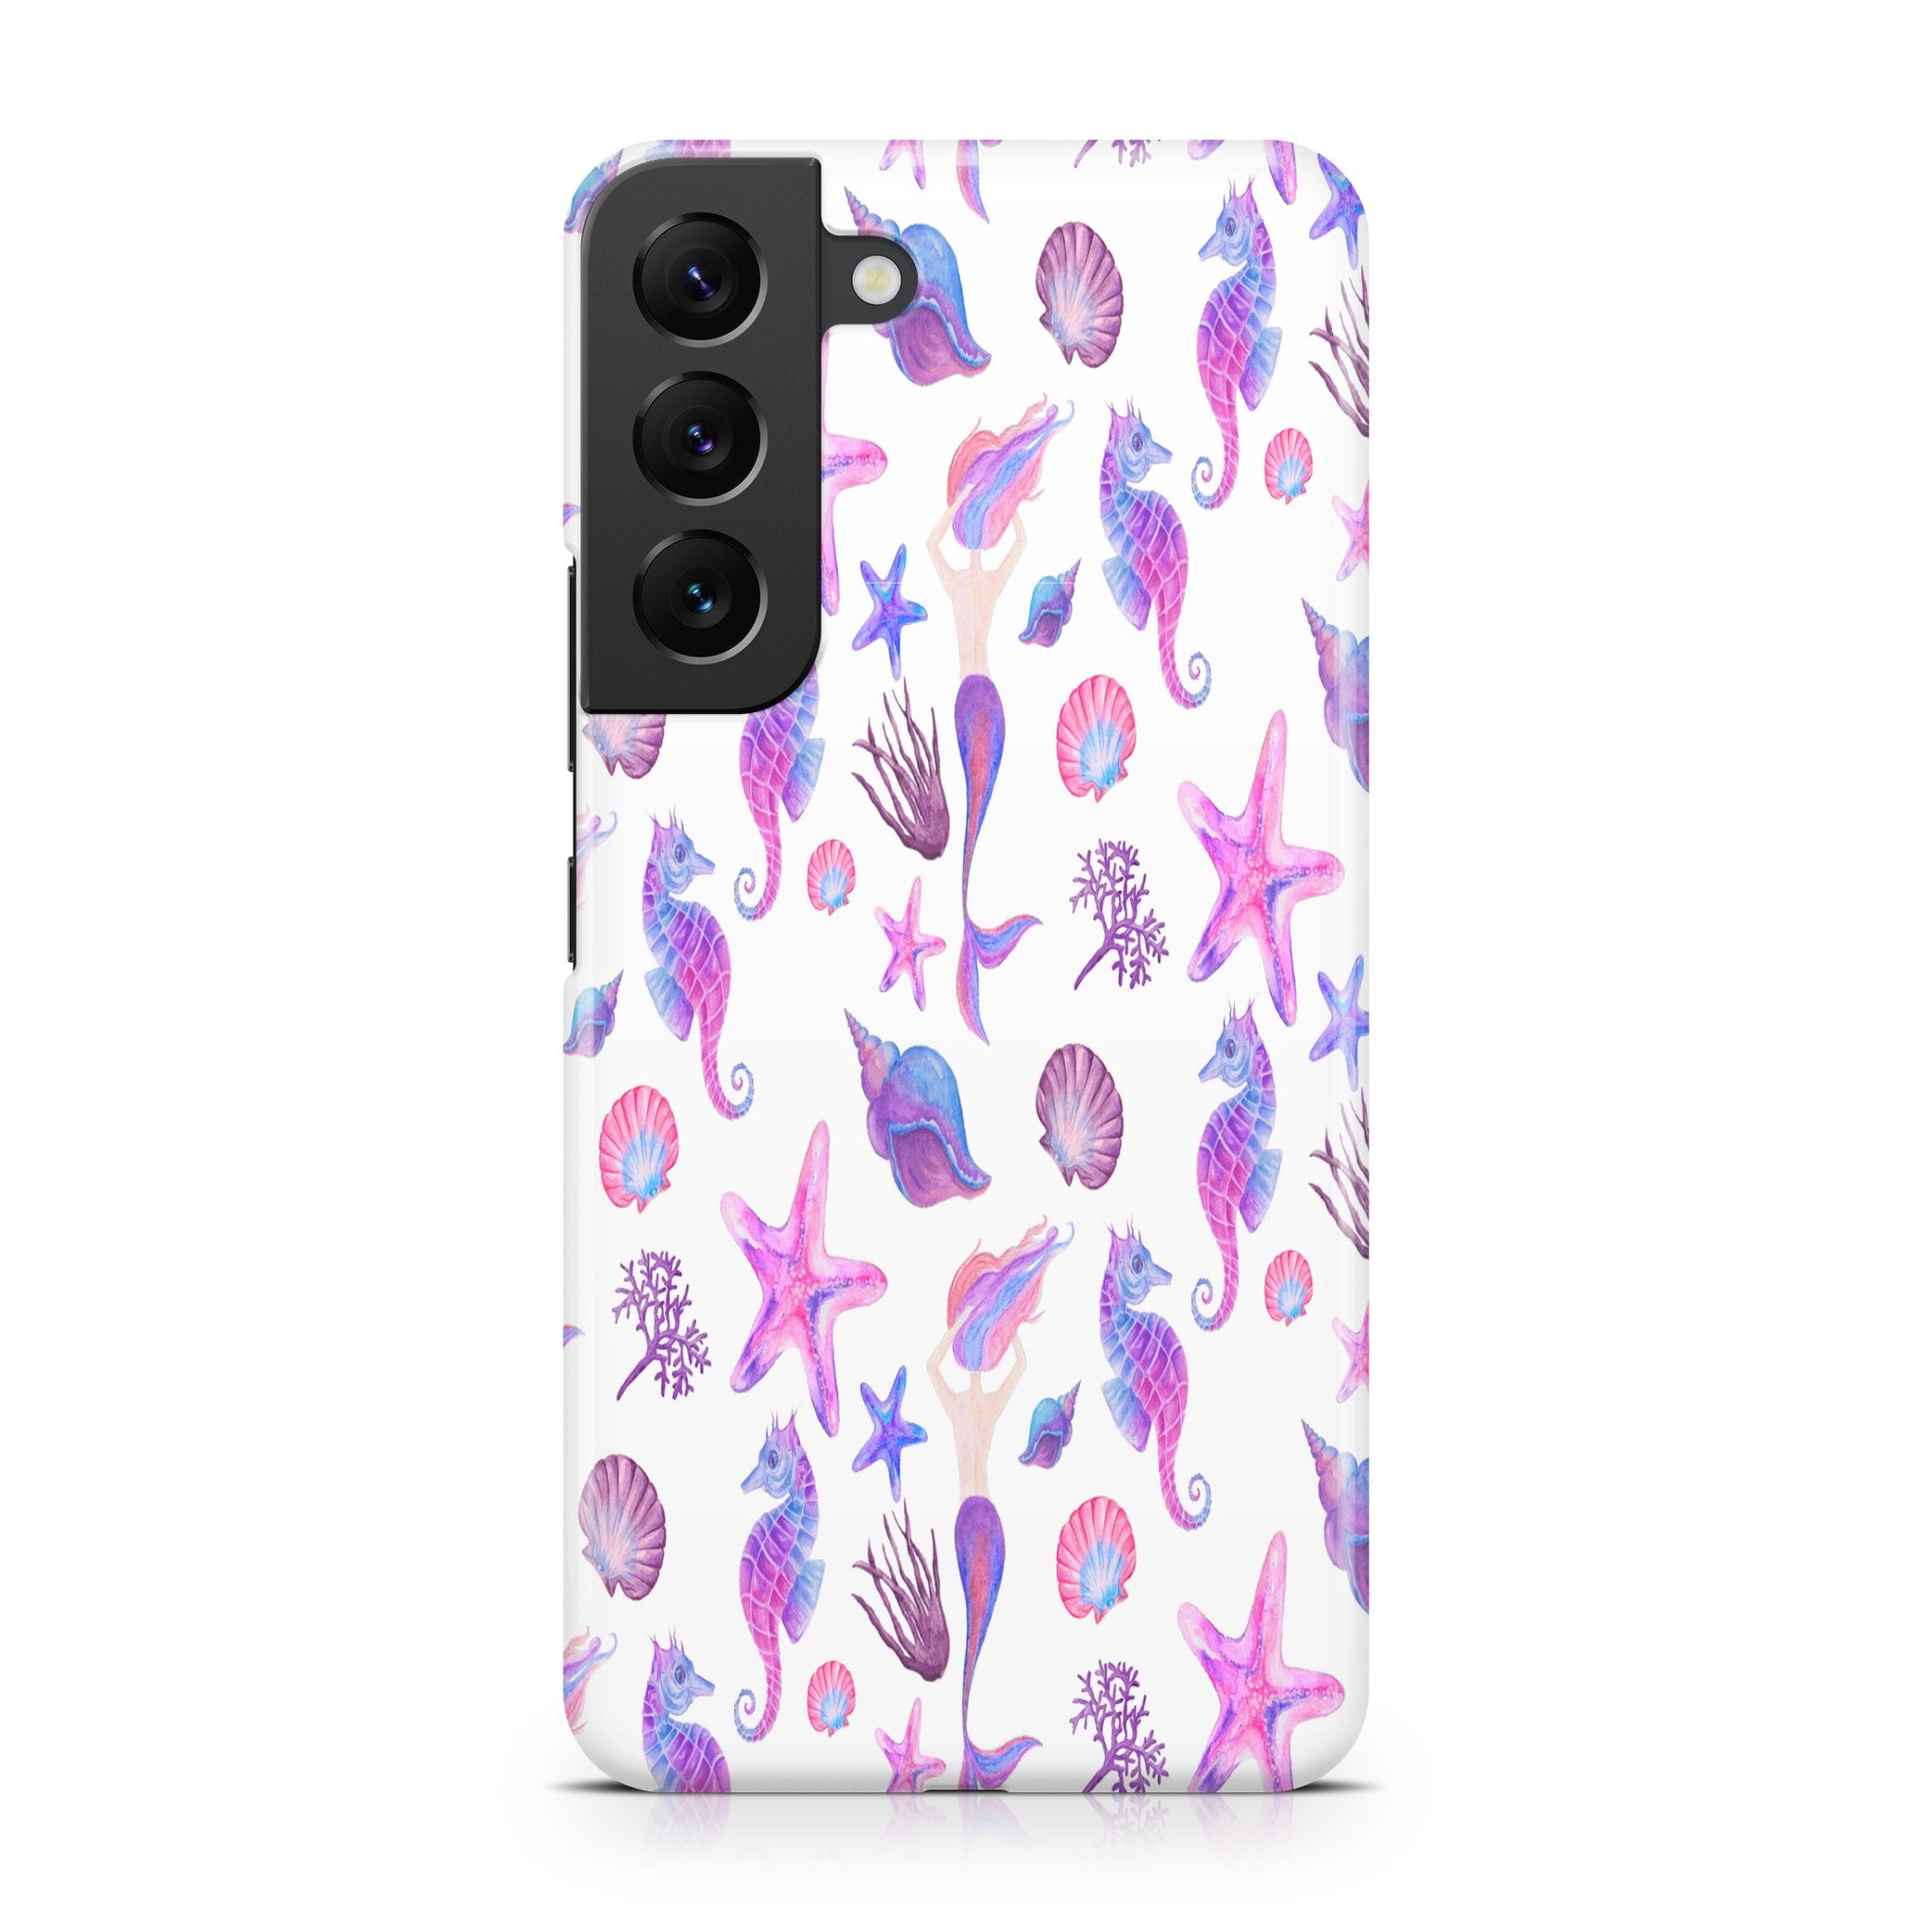 Summer Seaboard - Samsung phone case designs by CaseSwagger